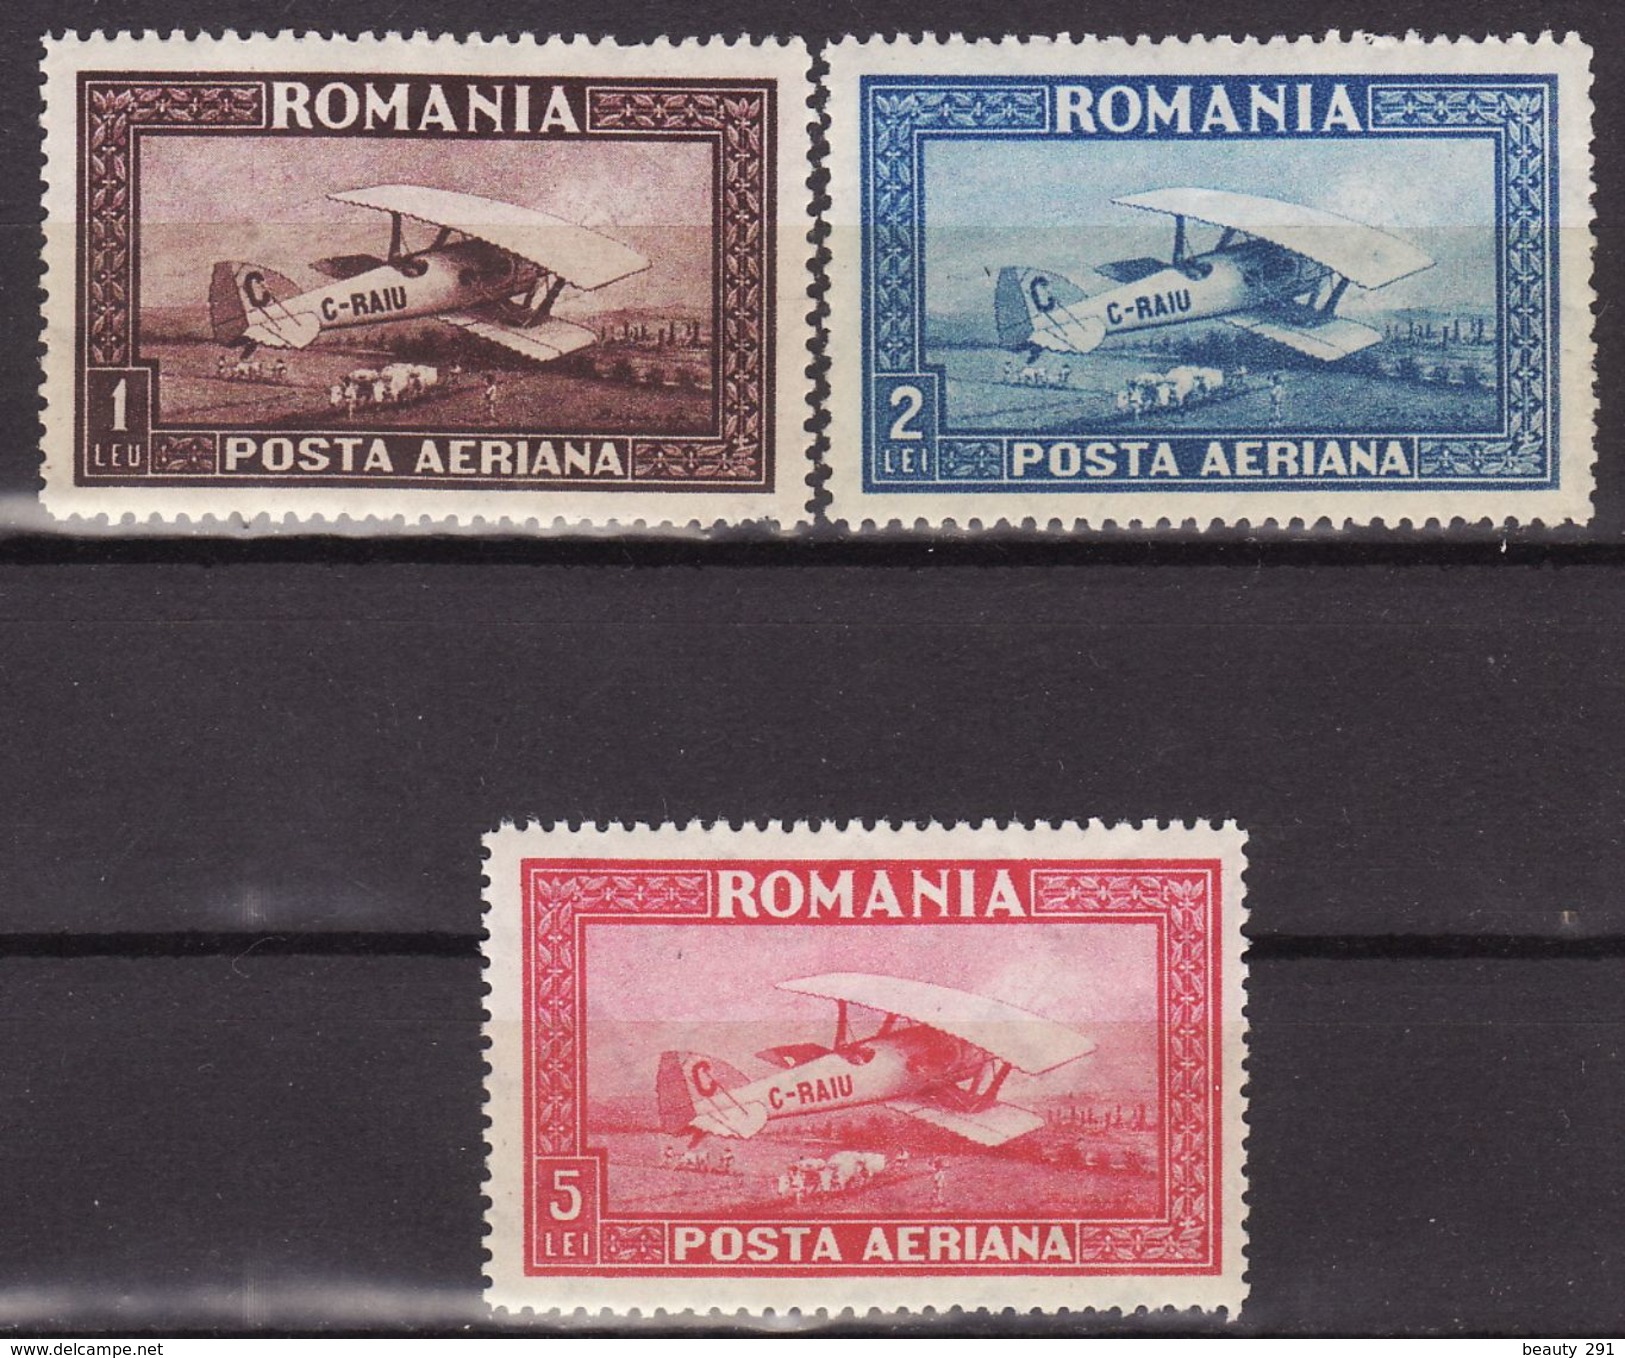 Romania 1918 Mi 336 - 338y ,2 Stamps MNH**,1 Stamp MH*  Airmail,Airplanes - Ongebruikt